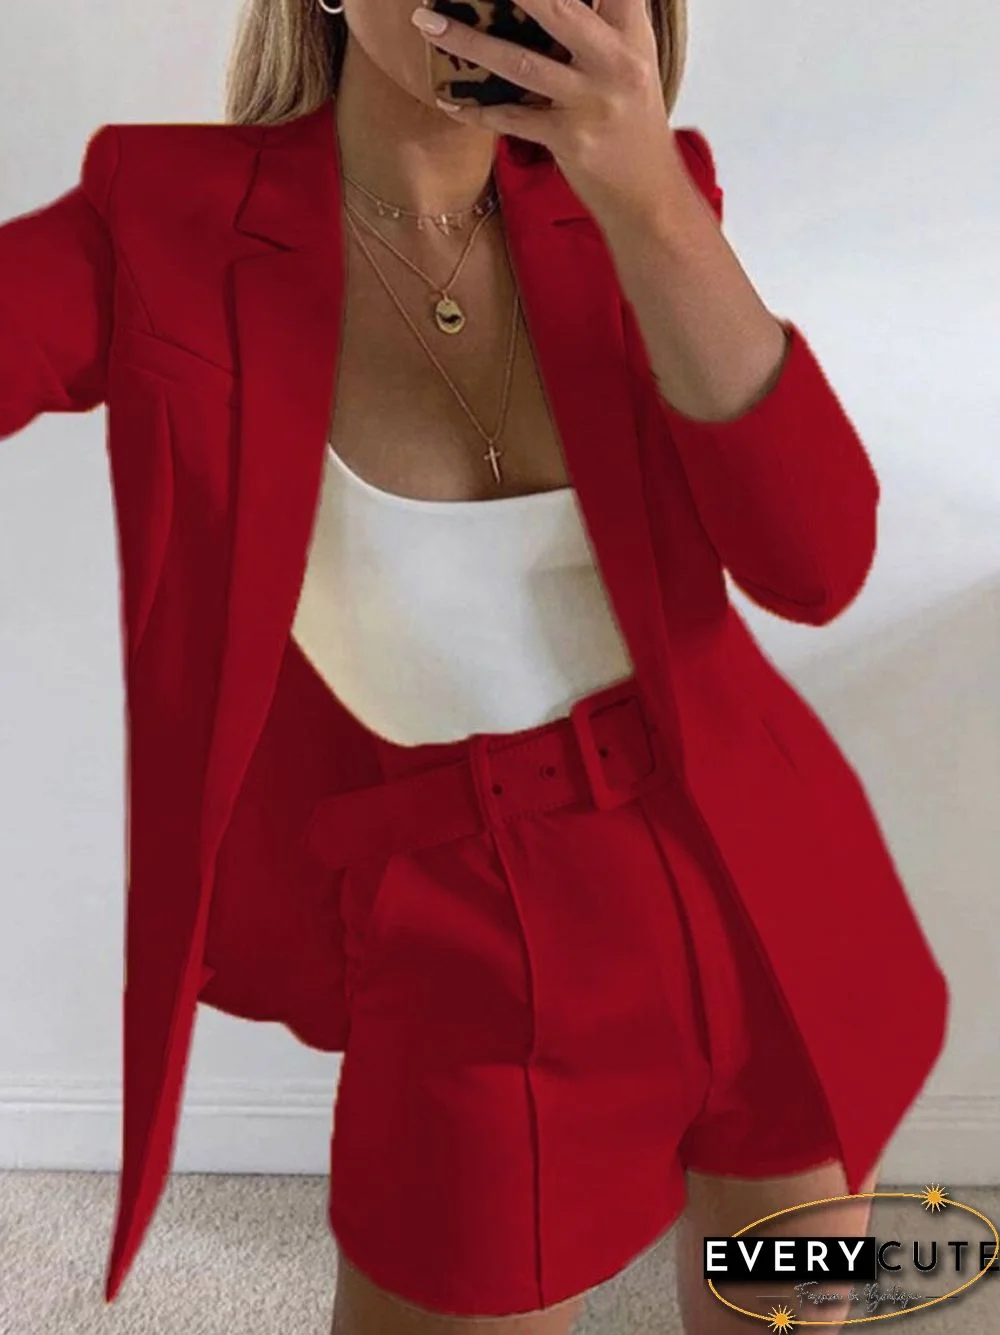 New Spring And Summer Suit Jacket Shorts Sexy Temperament Women's Fashion Casual Lapel Cardigan Fashion Belt Women's Wear Set